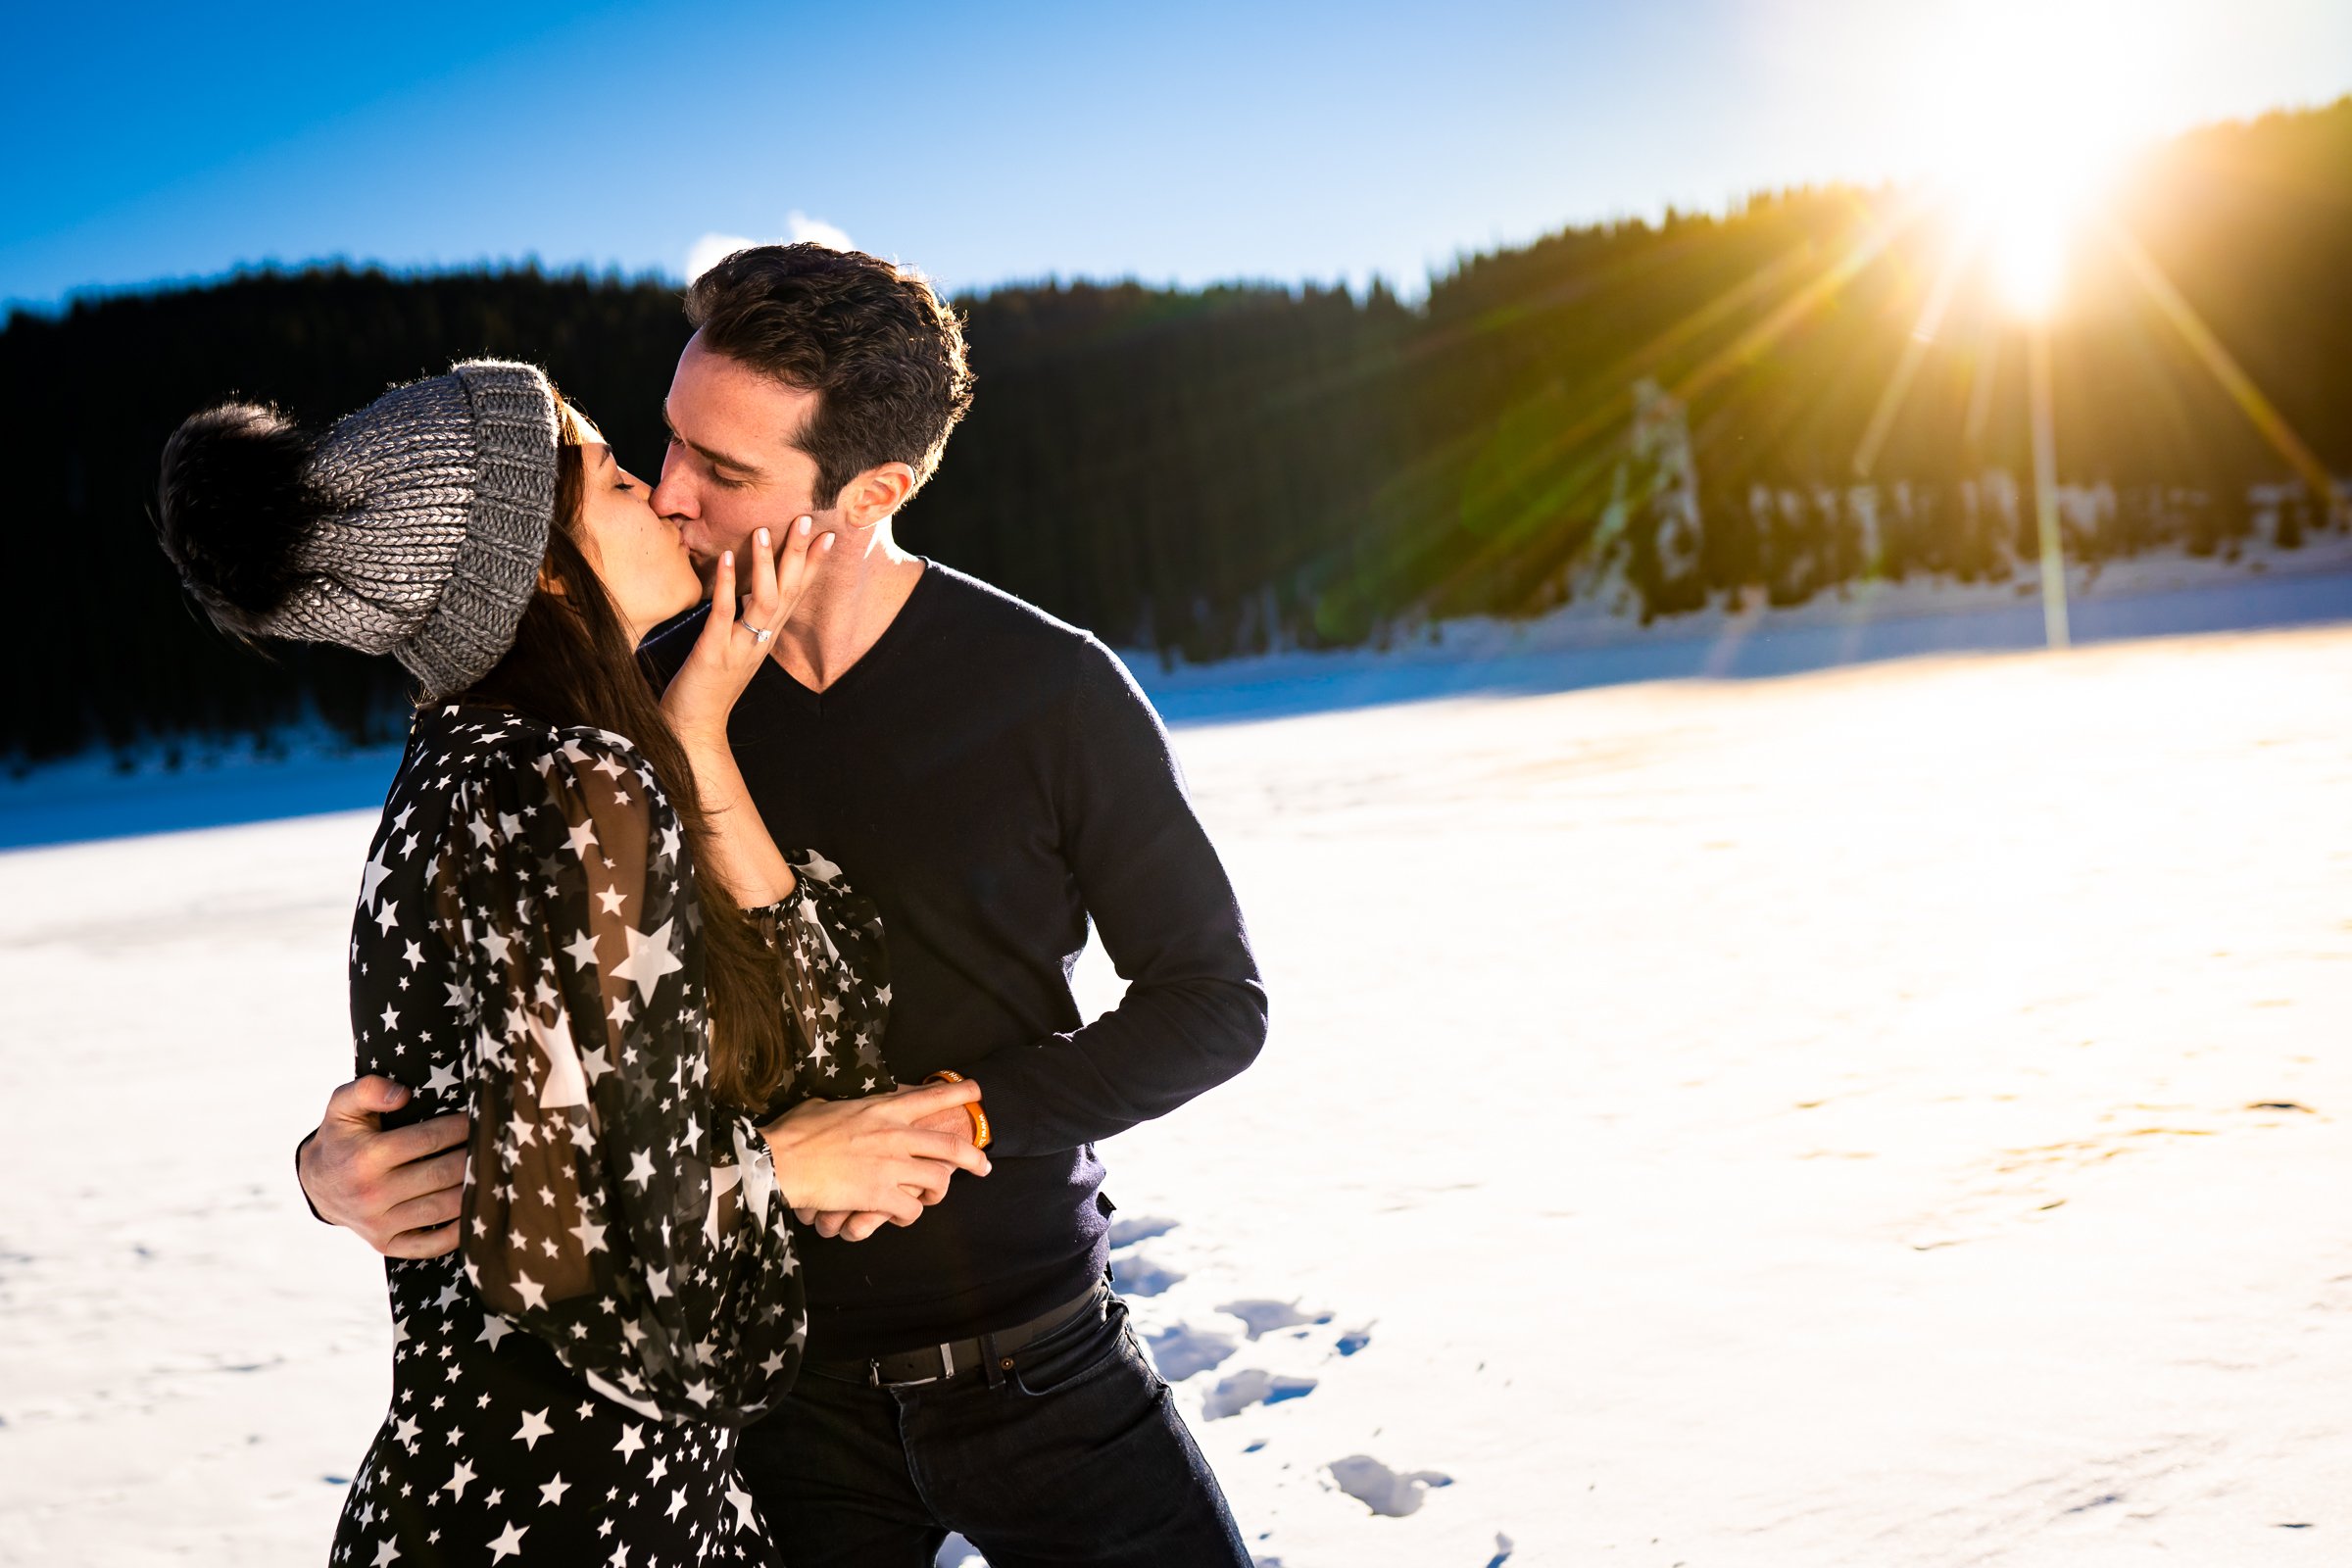 Newly engaged couple celebrate their proposal on a frozen lake with snowcapped mountains in the background, Engagement Session, Engagement Photos, Engagement Photos Inspiration, Engagement Photography, Engagement Photographer, Winter Engagement Photos, Proposal Photos, Proposal Photographer, Proposal Photography, Winter Proposal, Mountain Proposal, Proposal Inspiration, Summit County engagement session, Summit County engagement photos, Summit County engagement photography, Summit County engagement photographer, Summit County engagement inspiration, Colorado engagement session, Colorado engagement photos, Colorado engagement photography, Colorado engagement photographer, Colorado engagement inspiration, Clinton Gulch Engagement